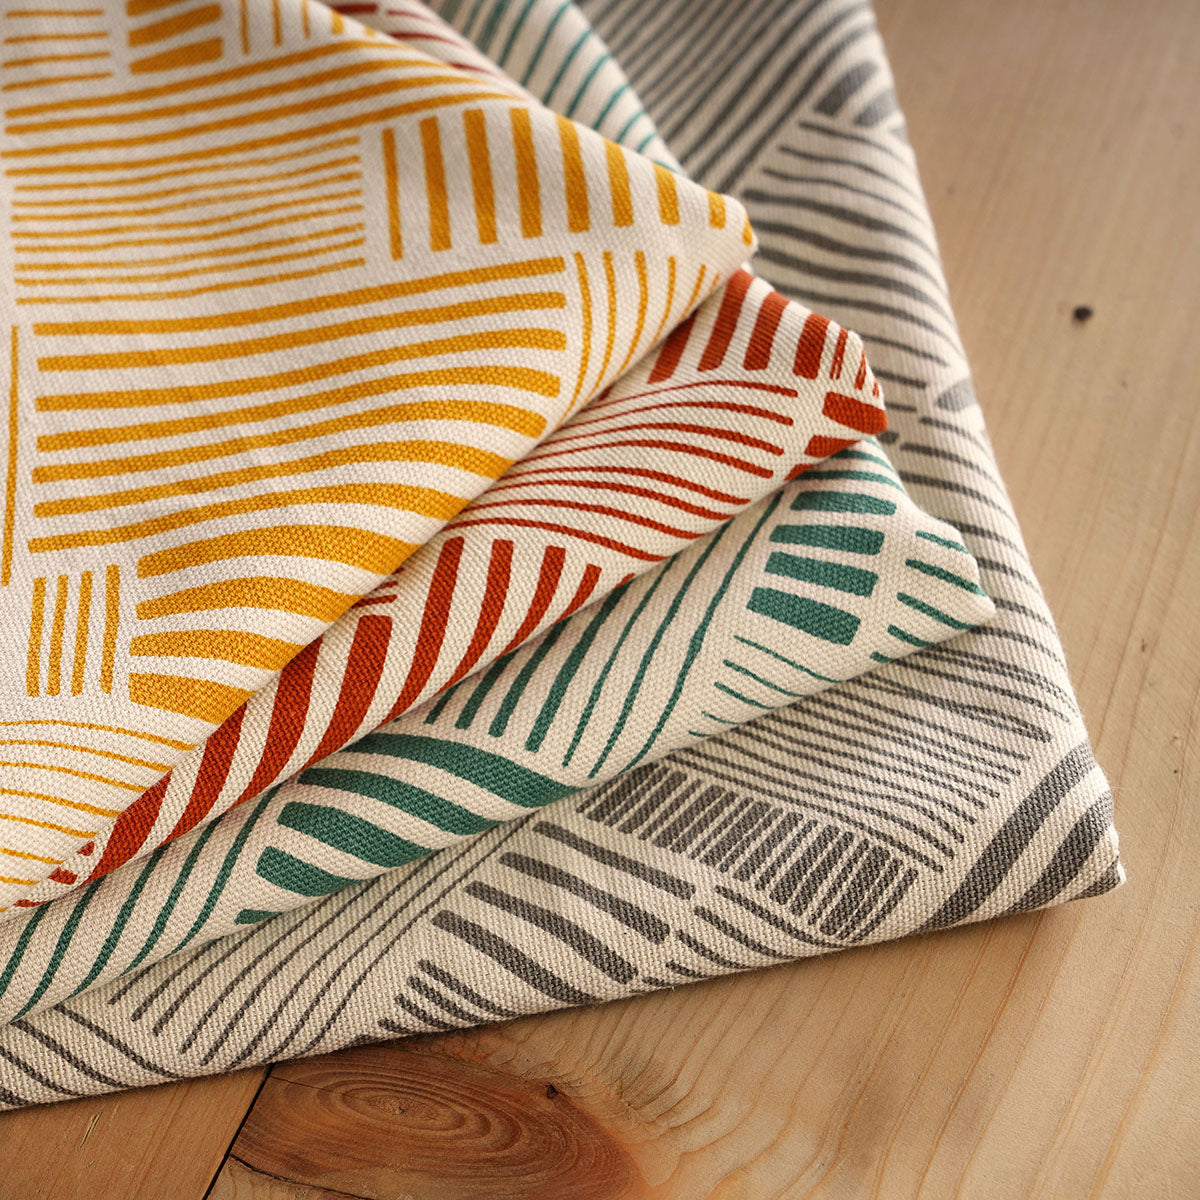 MODERN RETRO - Terracotta cotton table cloth with geometrical stripe print, Sizes available